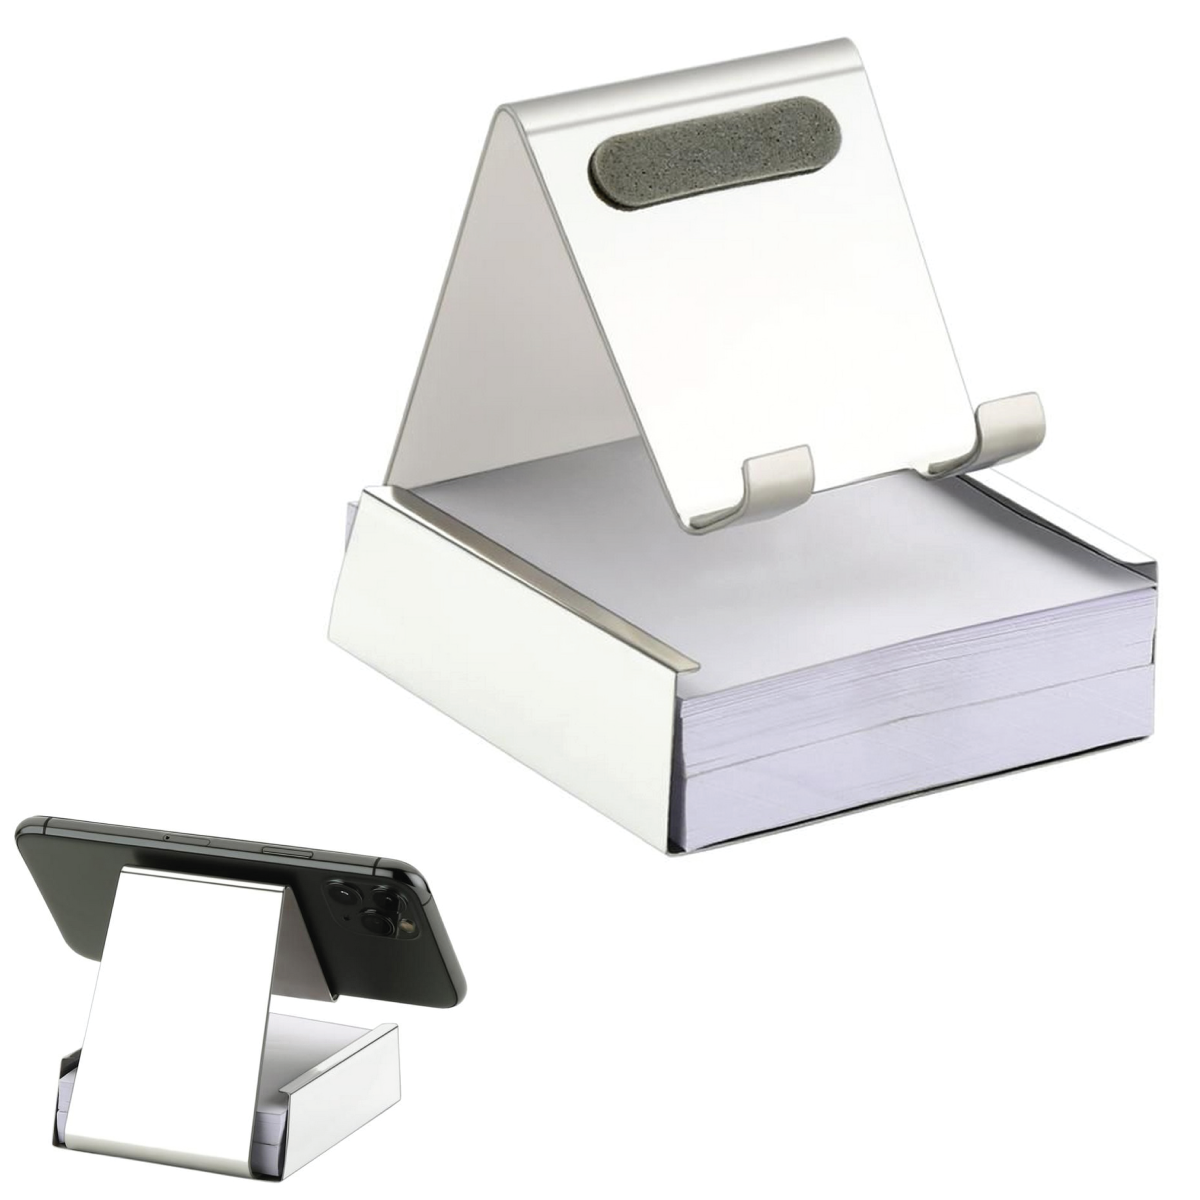 Silver Metal Mirror Finish Universal Mobile Phone Holder Stand with Writing Pad - For Personal, Corporate Gifting, Return Gift, Event Gifting, Promotional Freebies JAR-1106